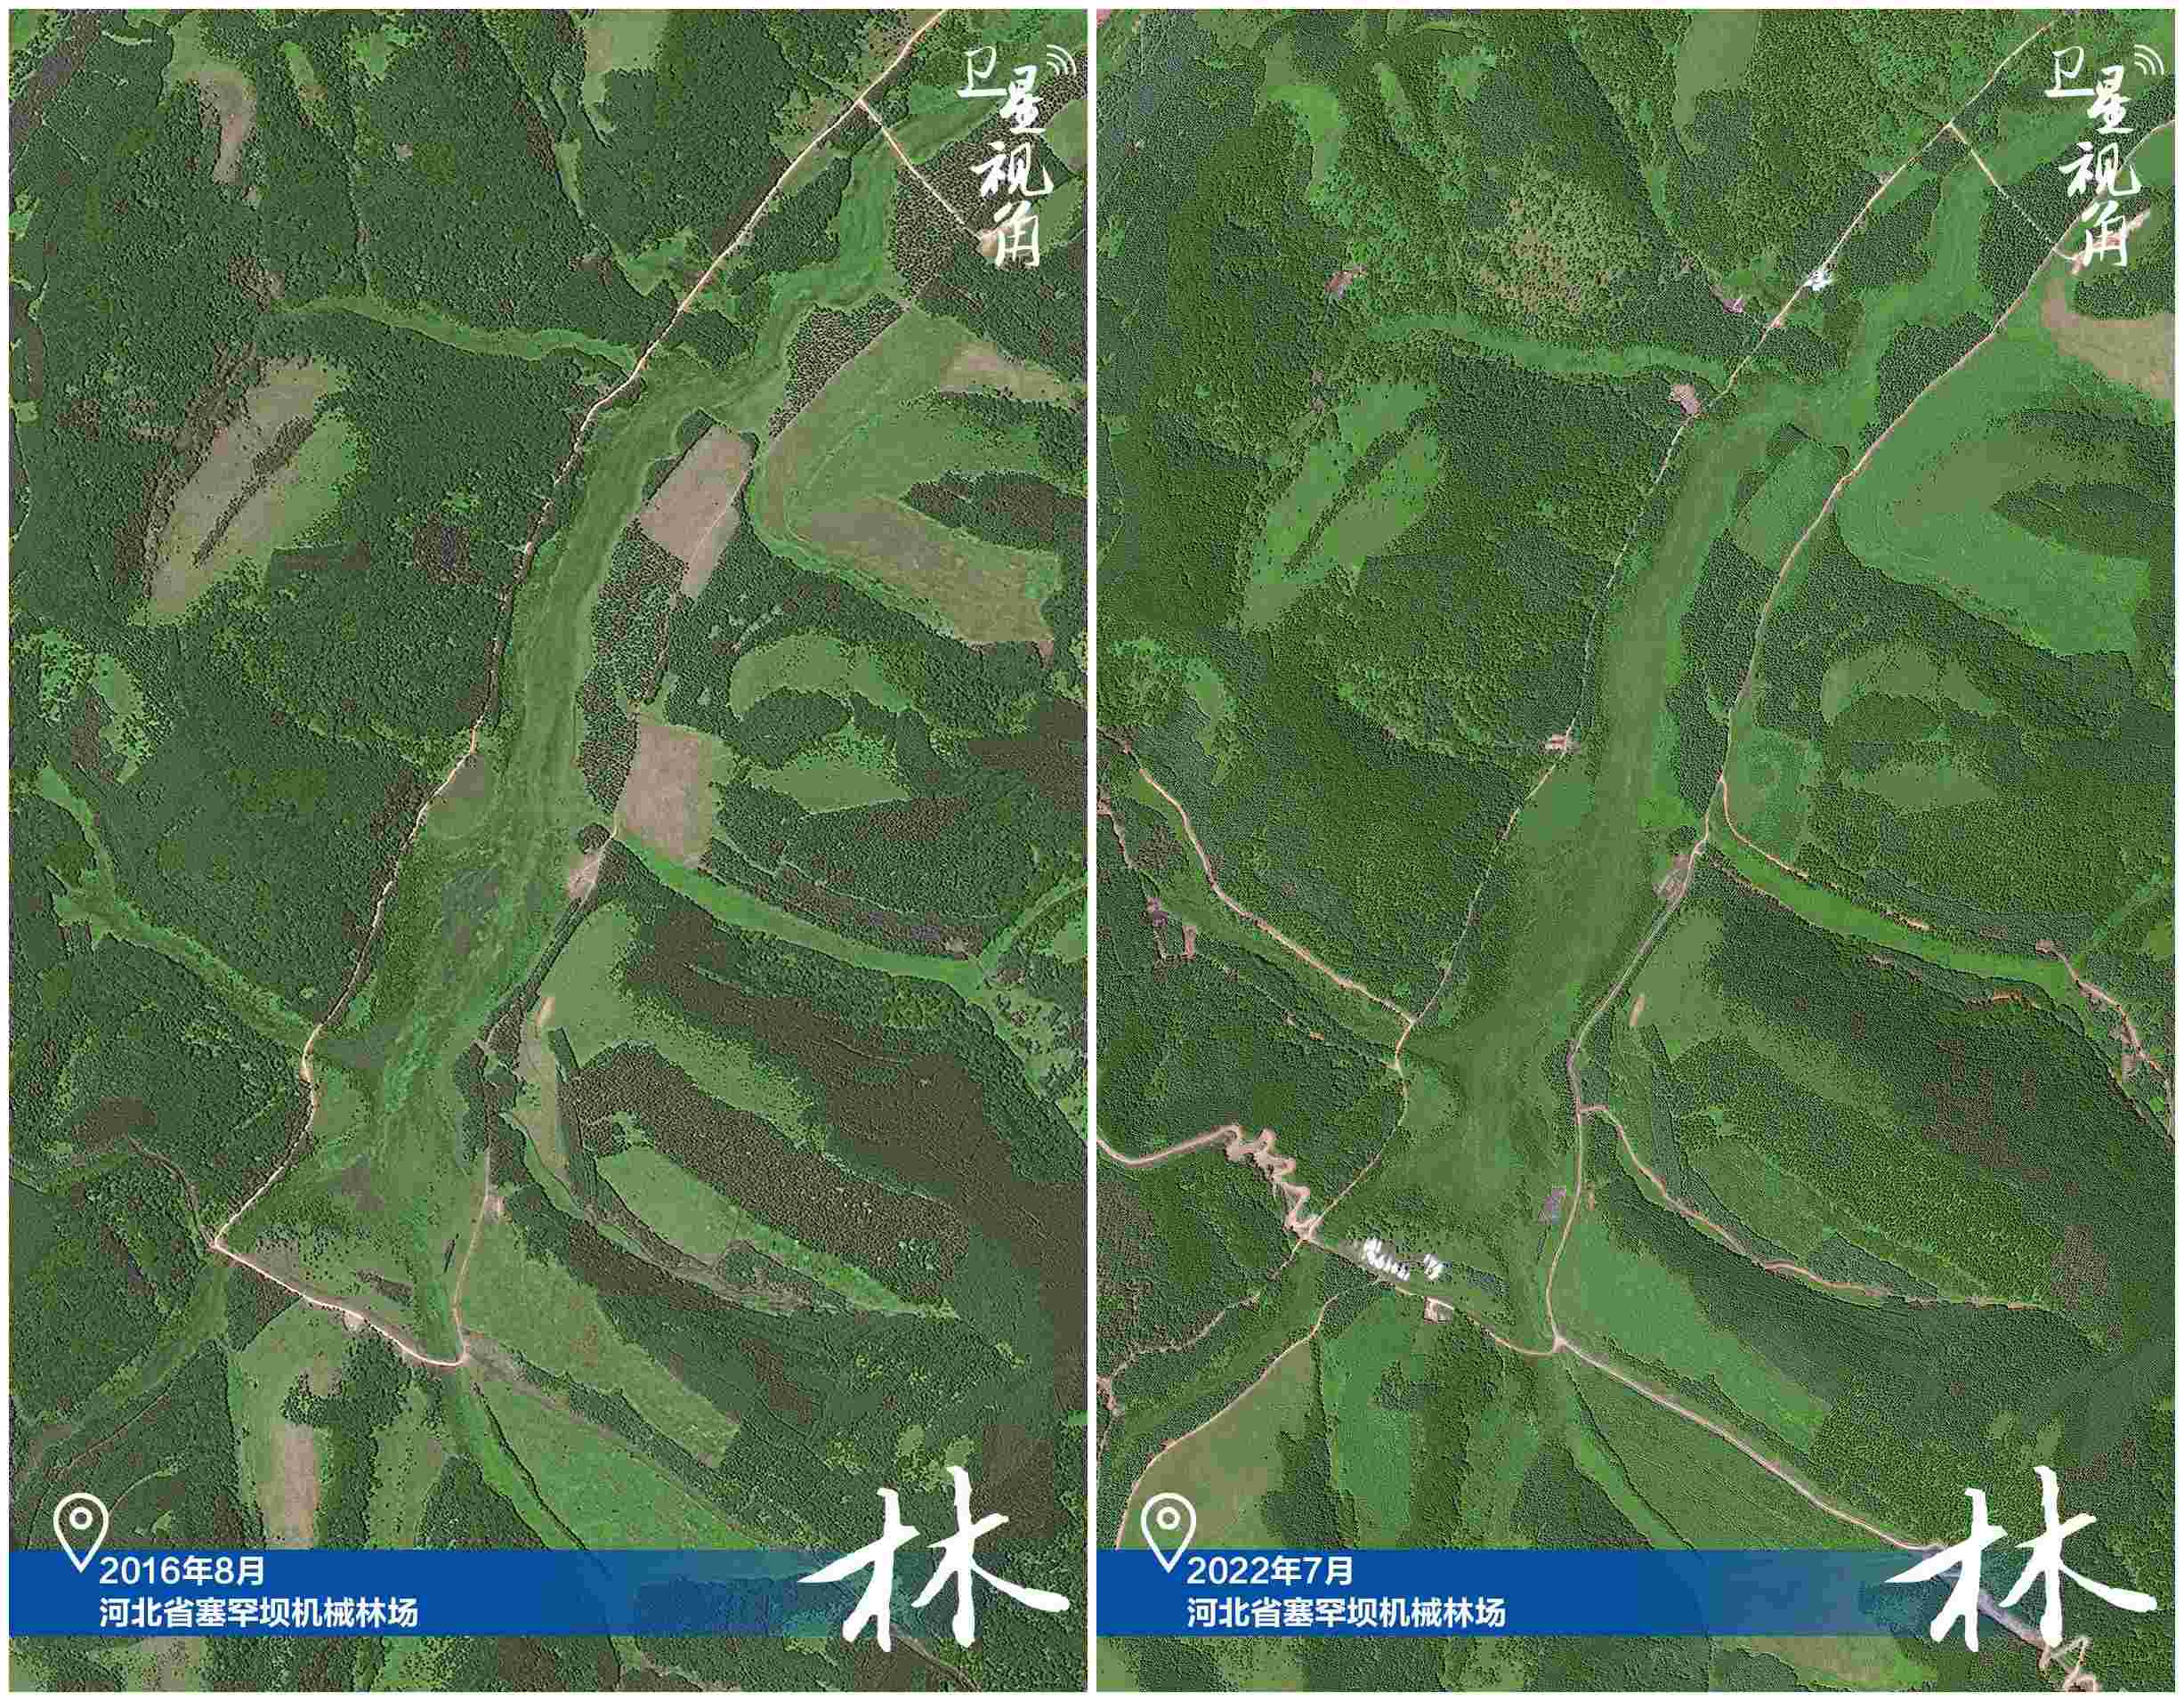 Experience China's Ecological Changes from a Satellite Perspective | Follow the Footprints of General Secretary | Ecology Protection | General Secretary